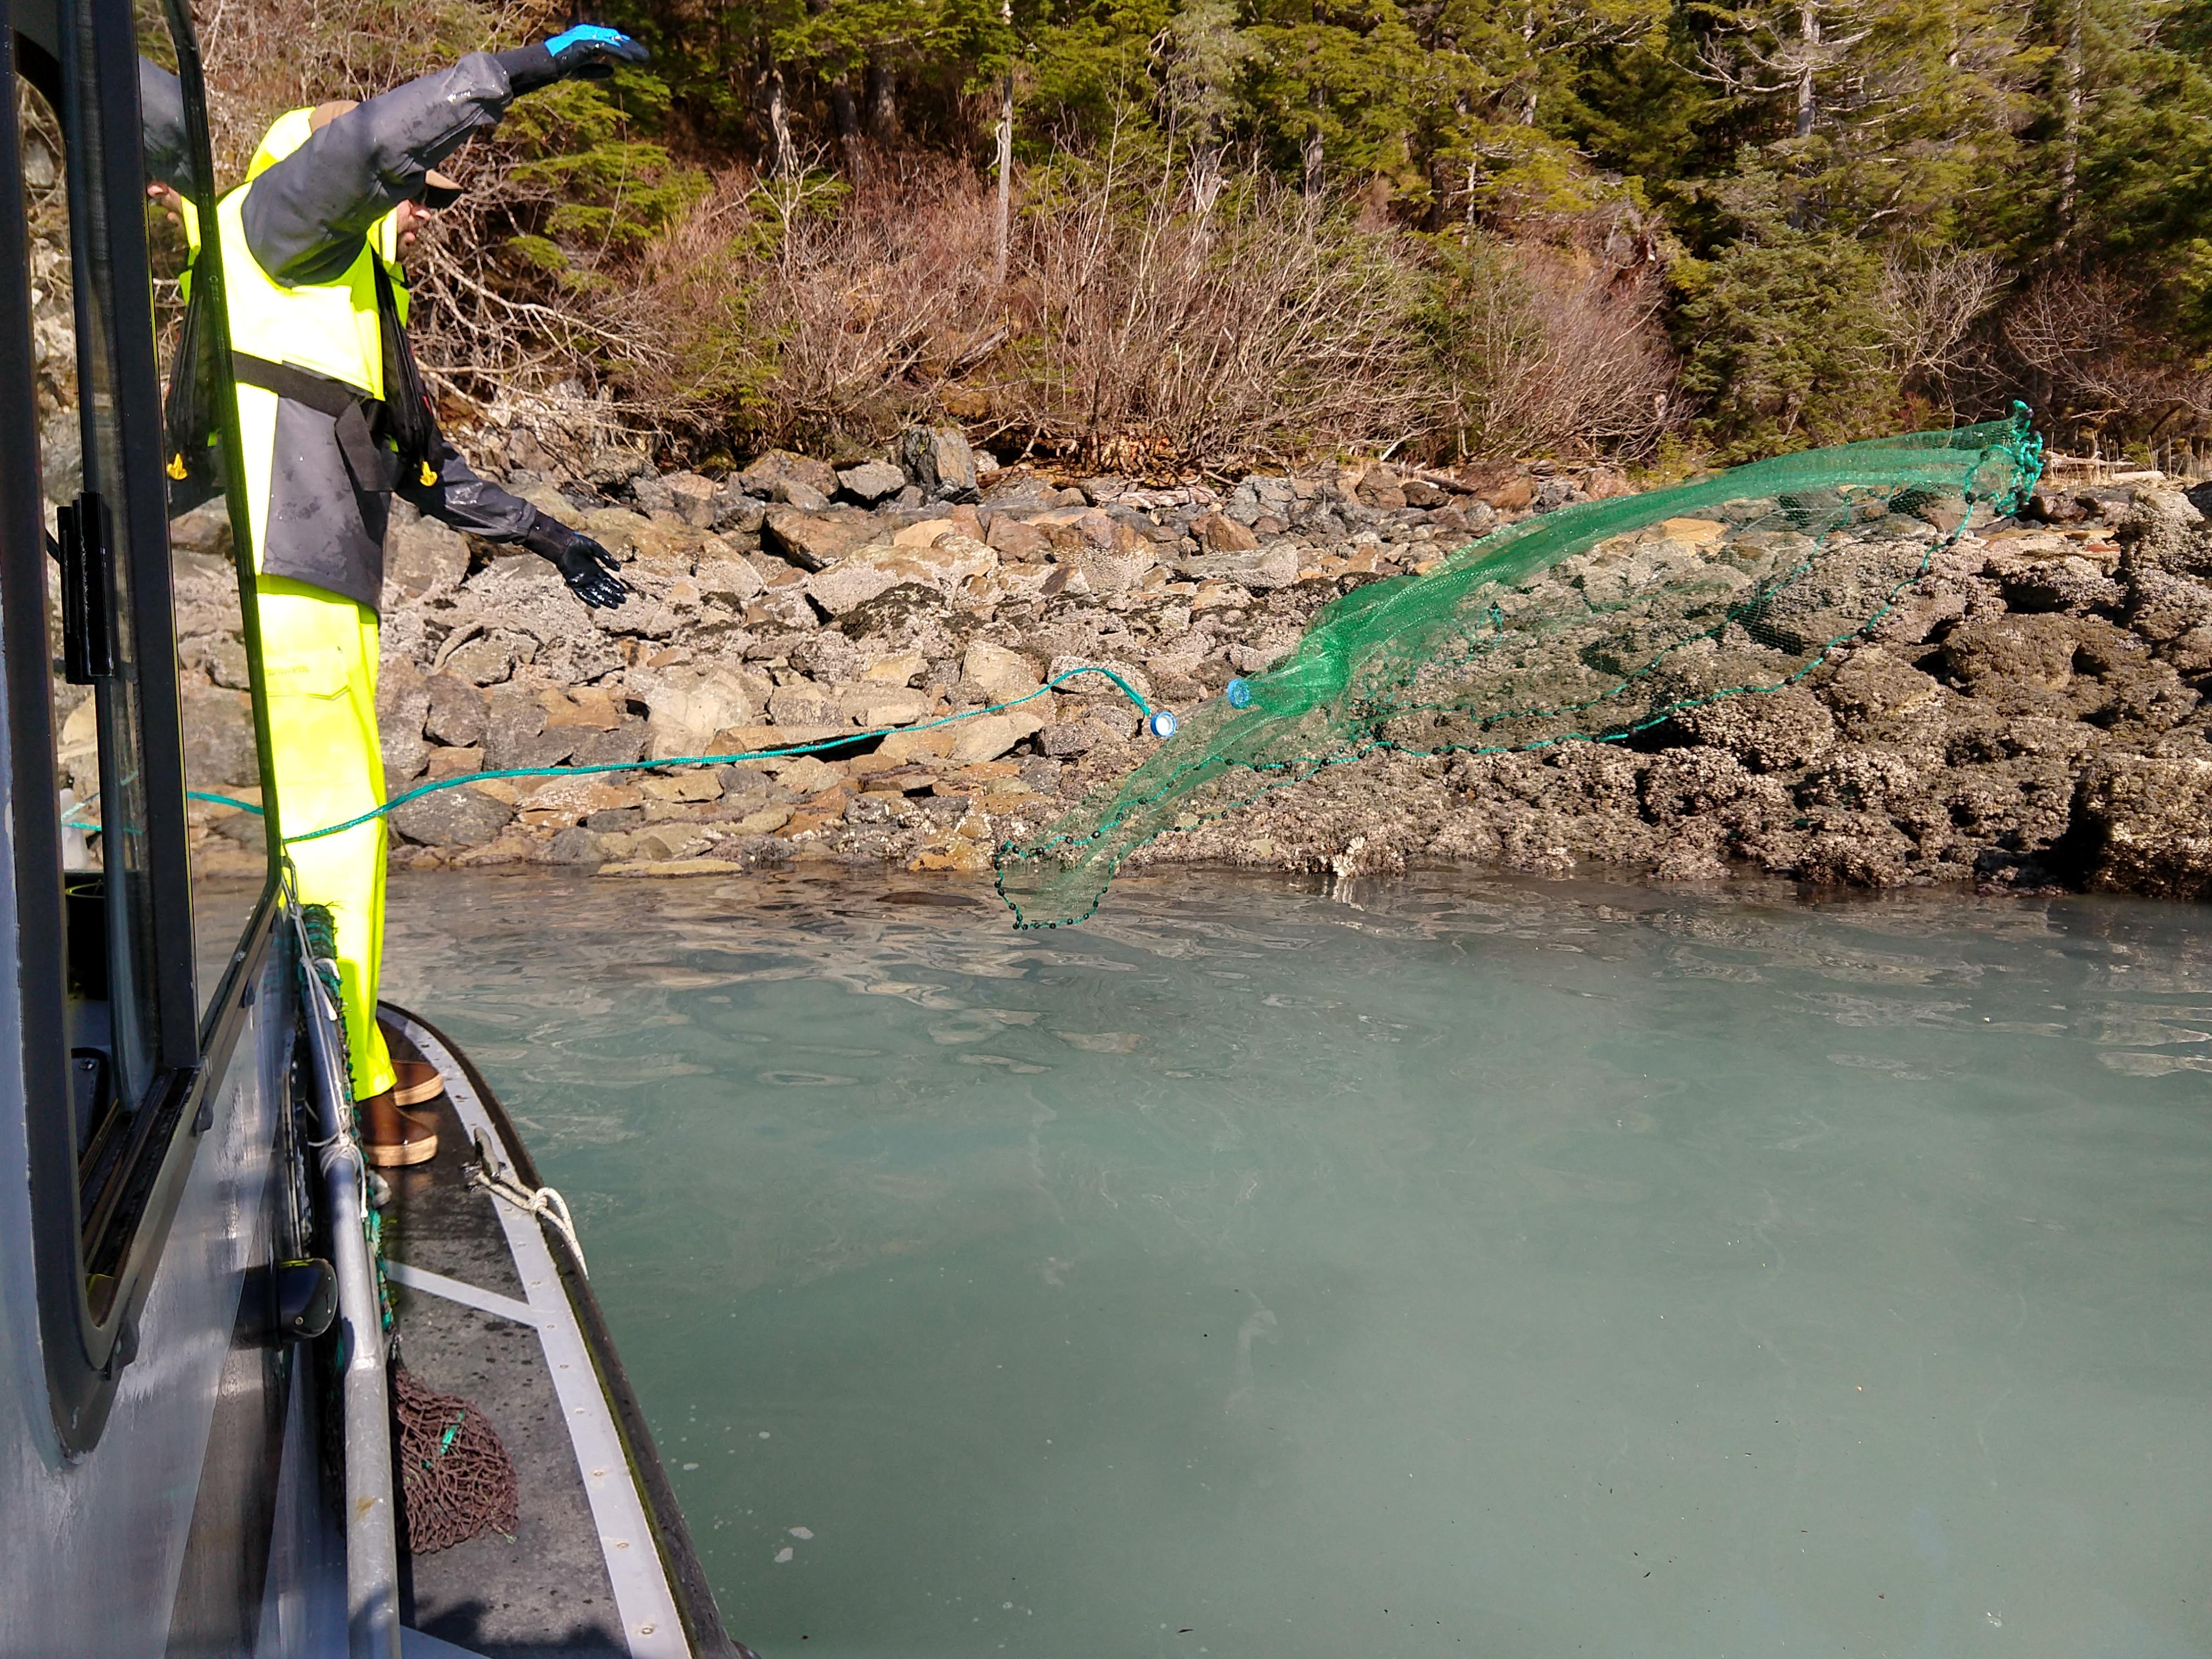 Sampling herring during spawning seasons in Sitka, Alaska, with biologists from the Alaska Department of Fish and Game